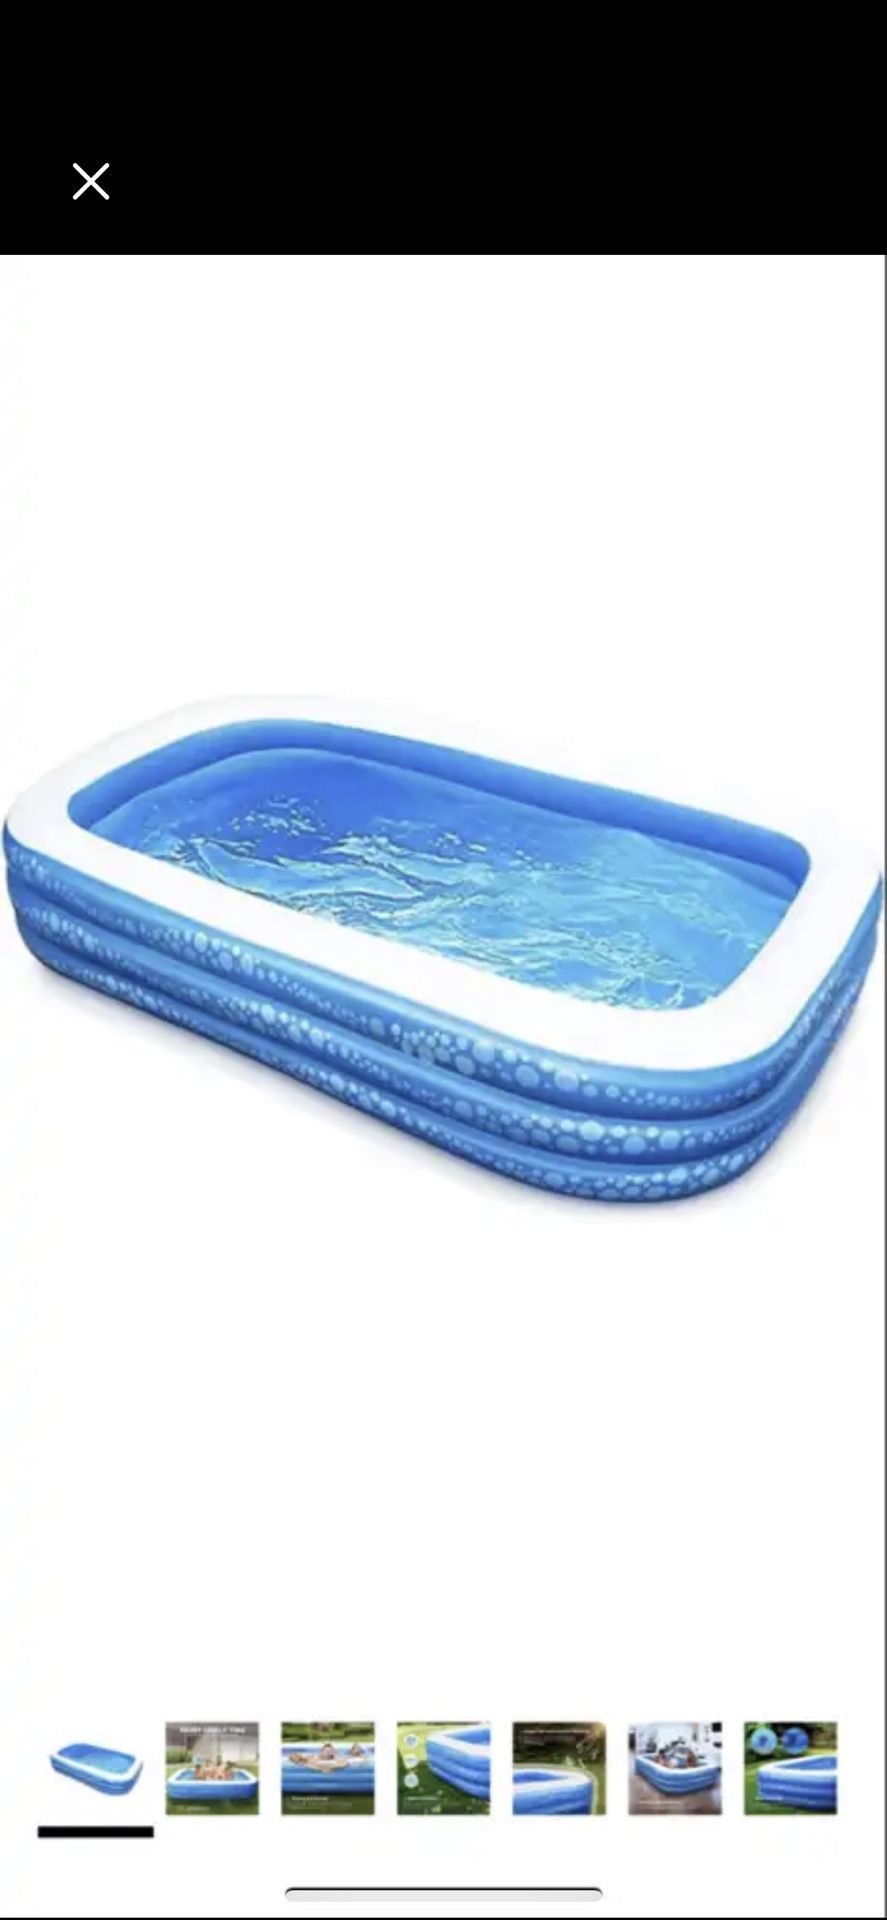 Large full sized inflatable pool (brand new in box) 